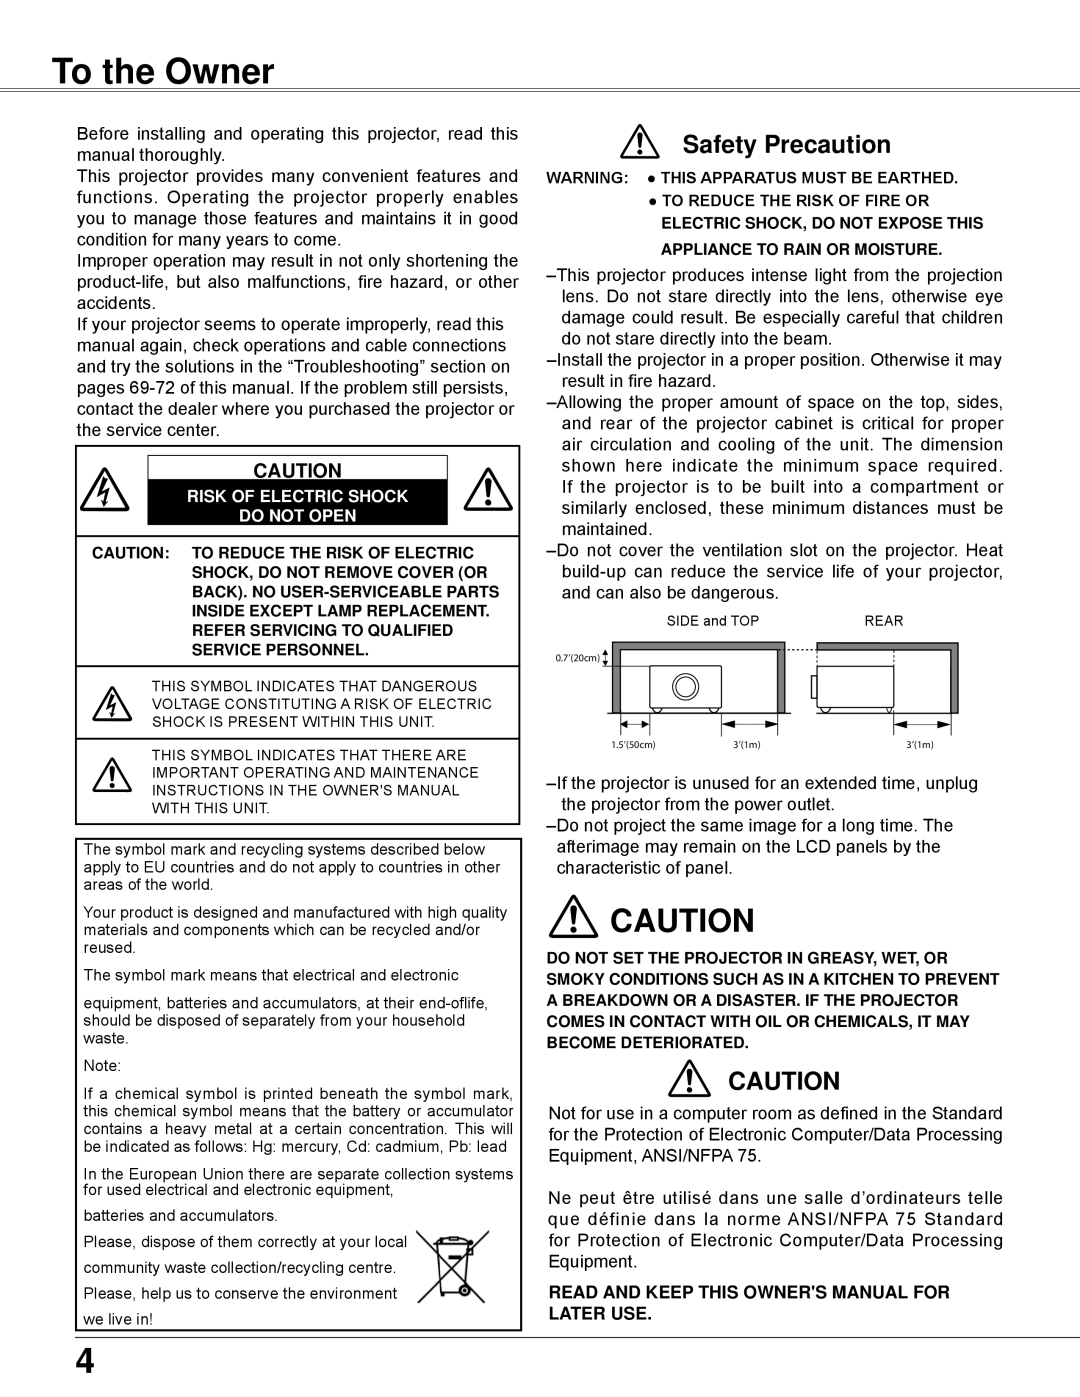 Sanyo PLC-WXU700 owner manual To the Owner, Safety Precaution, Risk Of Electric Shock Do Not Open 